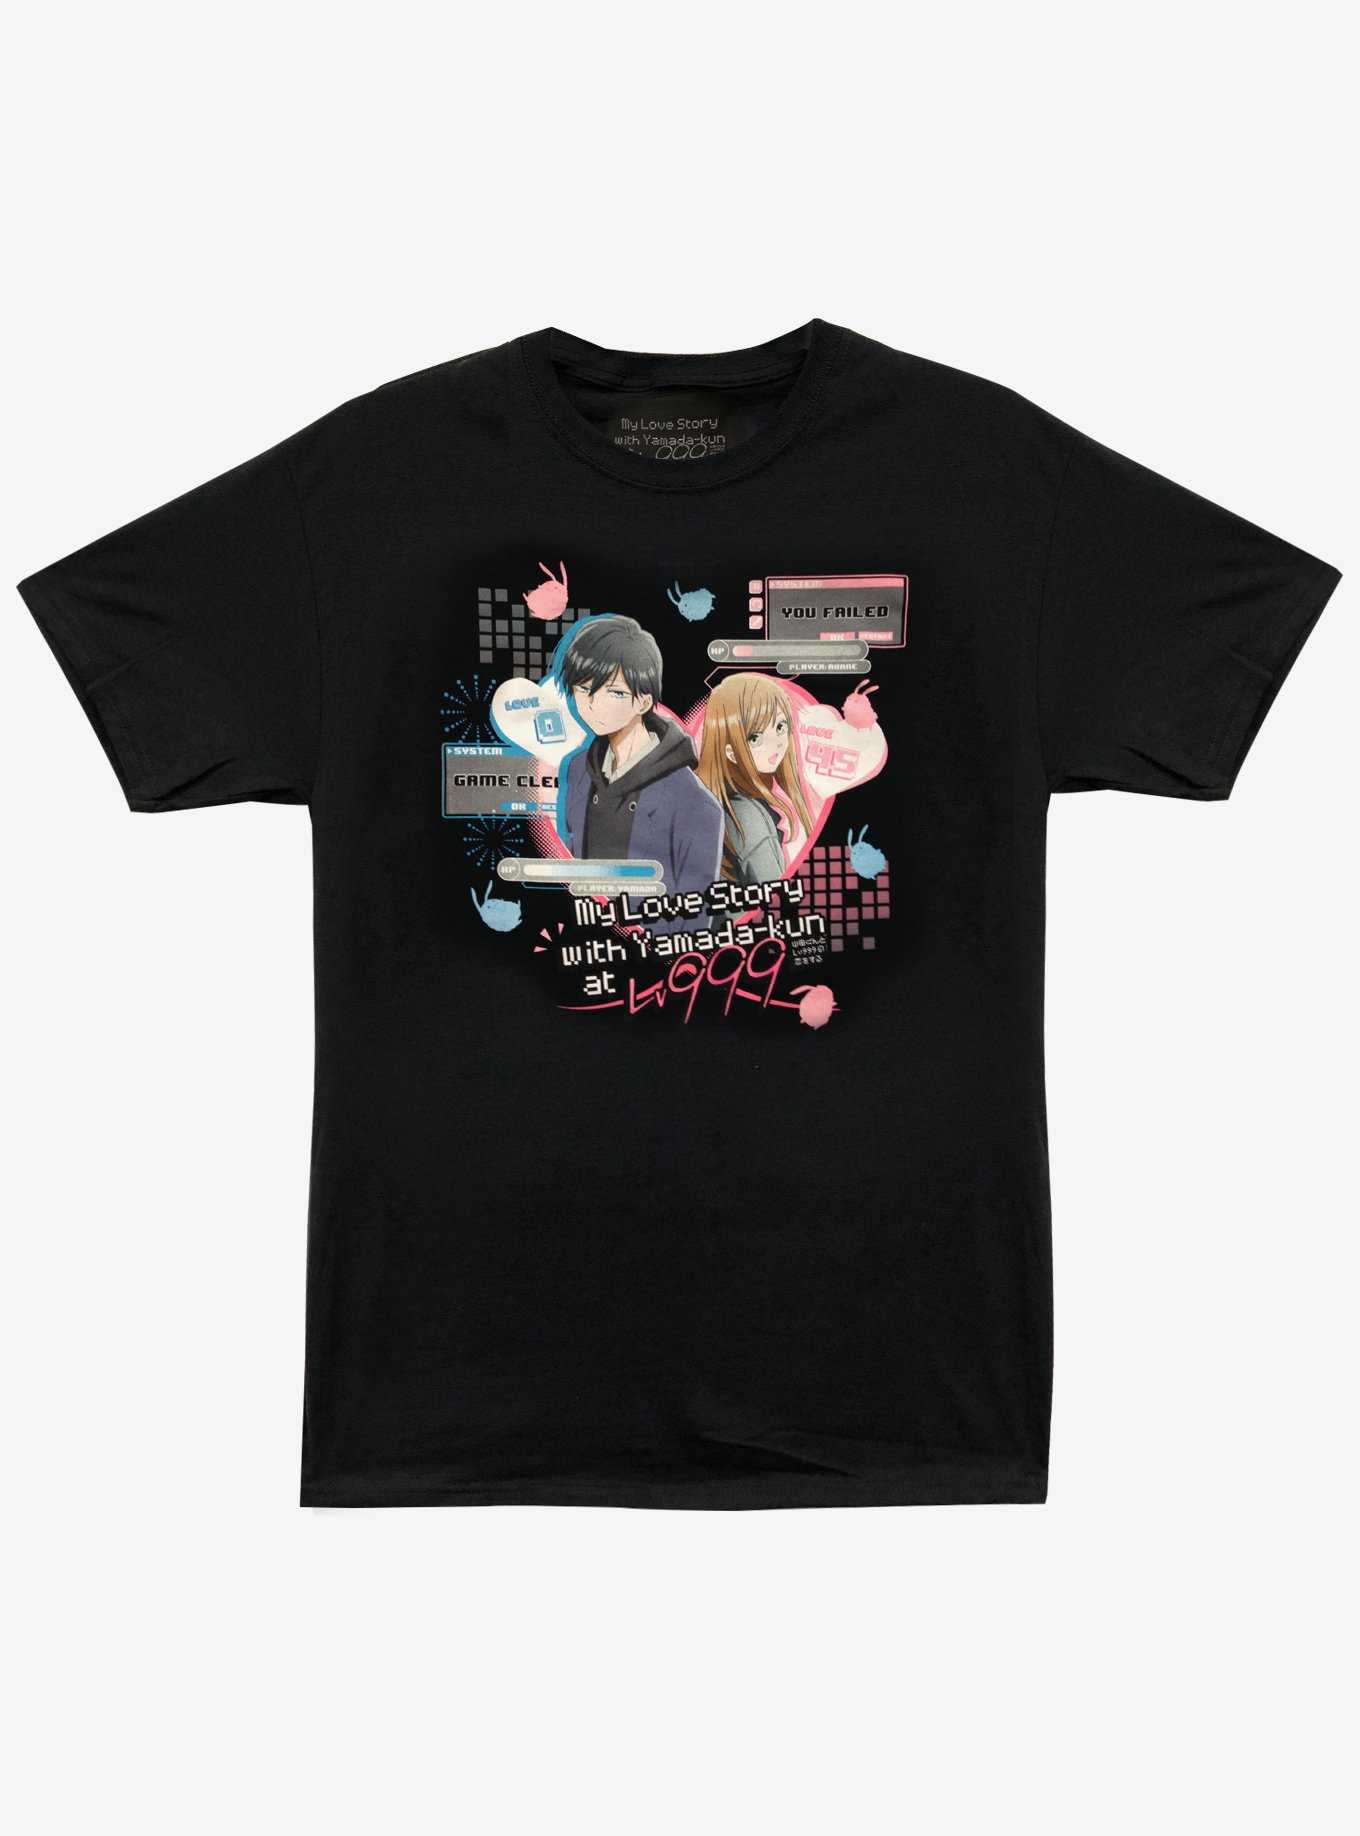 My Love Story With Yamada-Kun At Lv999 Game Boyfriend Fit Girls T-Shirt, , hi-res